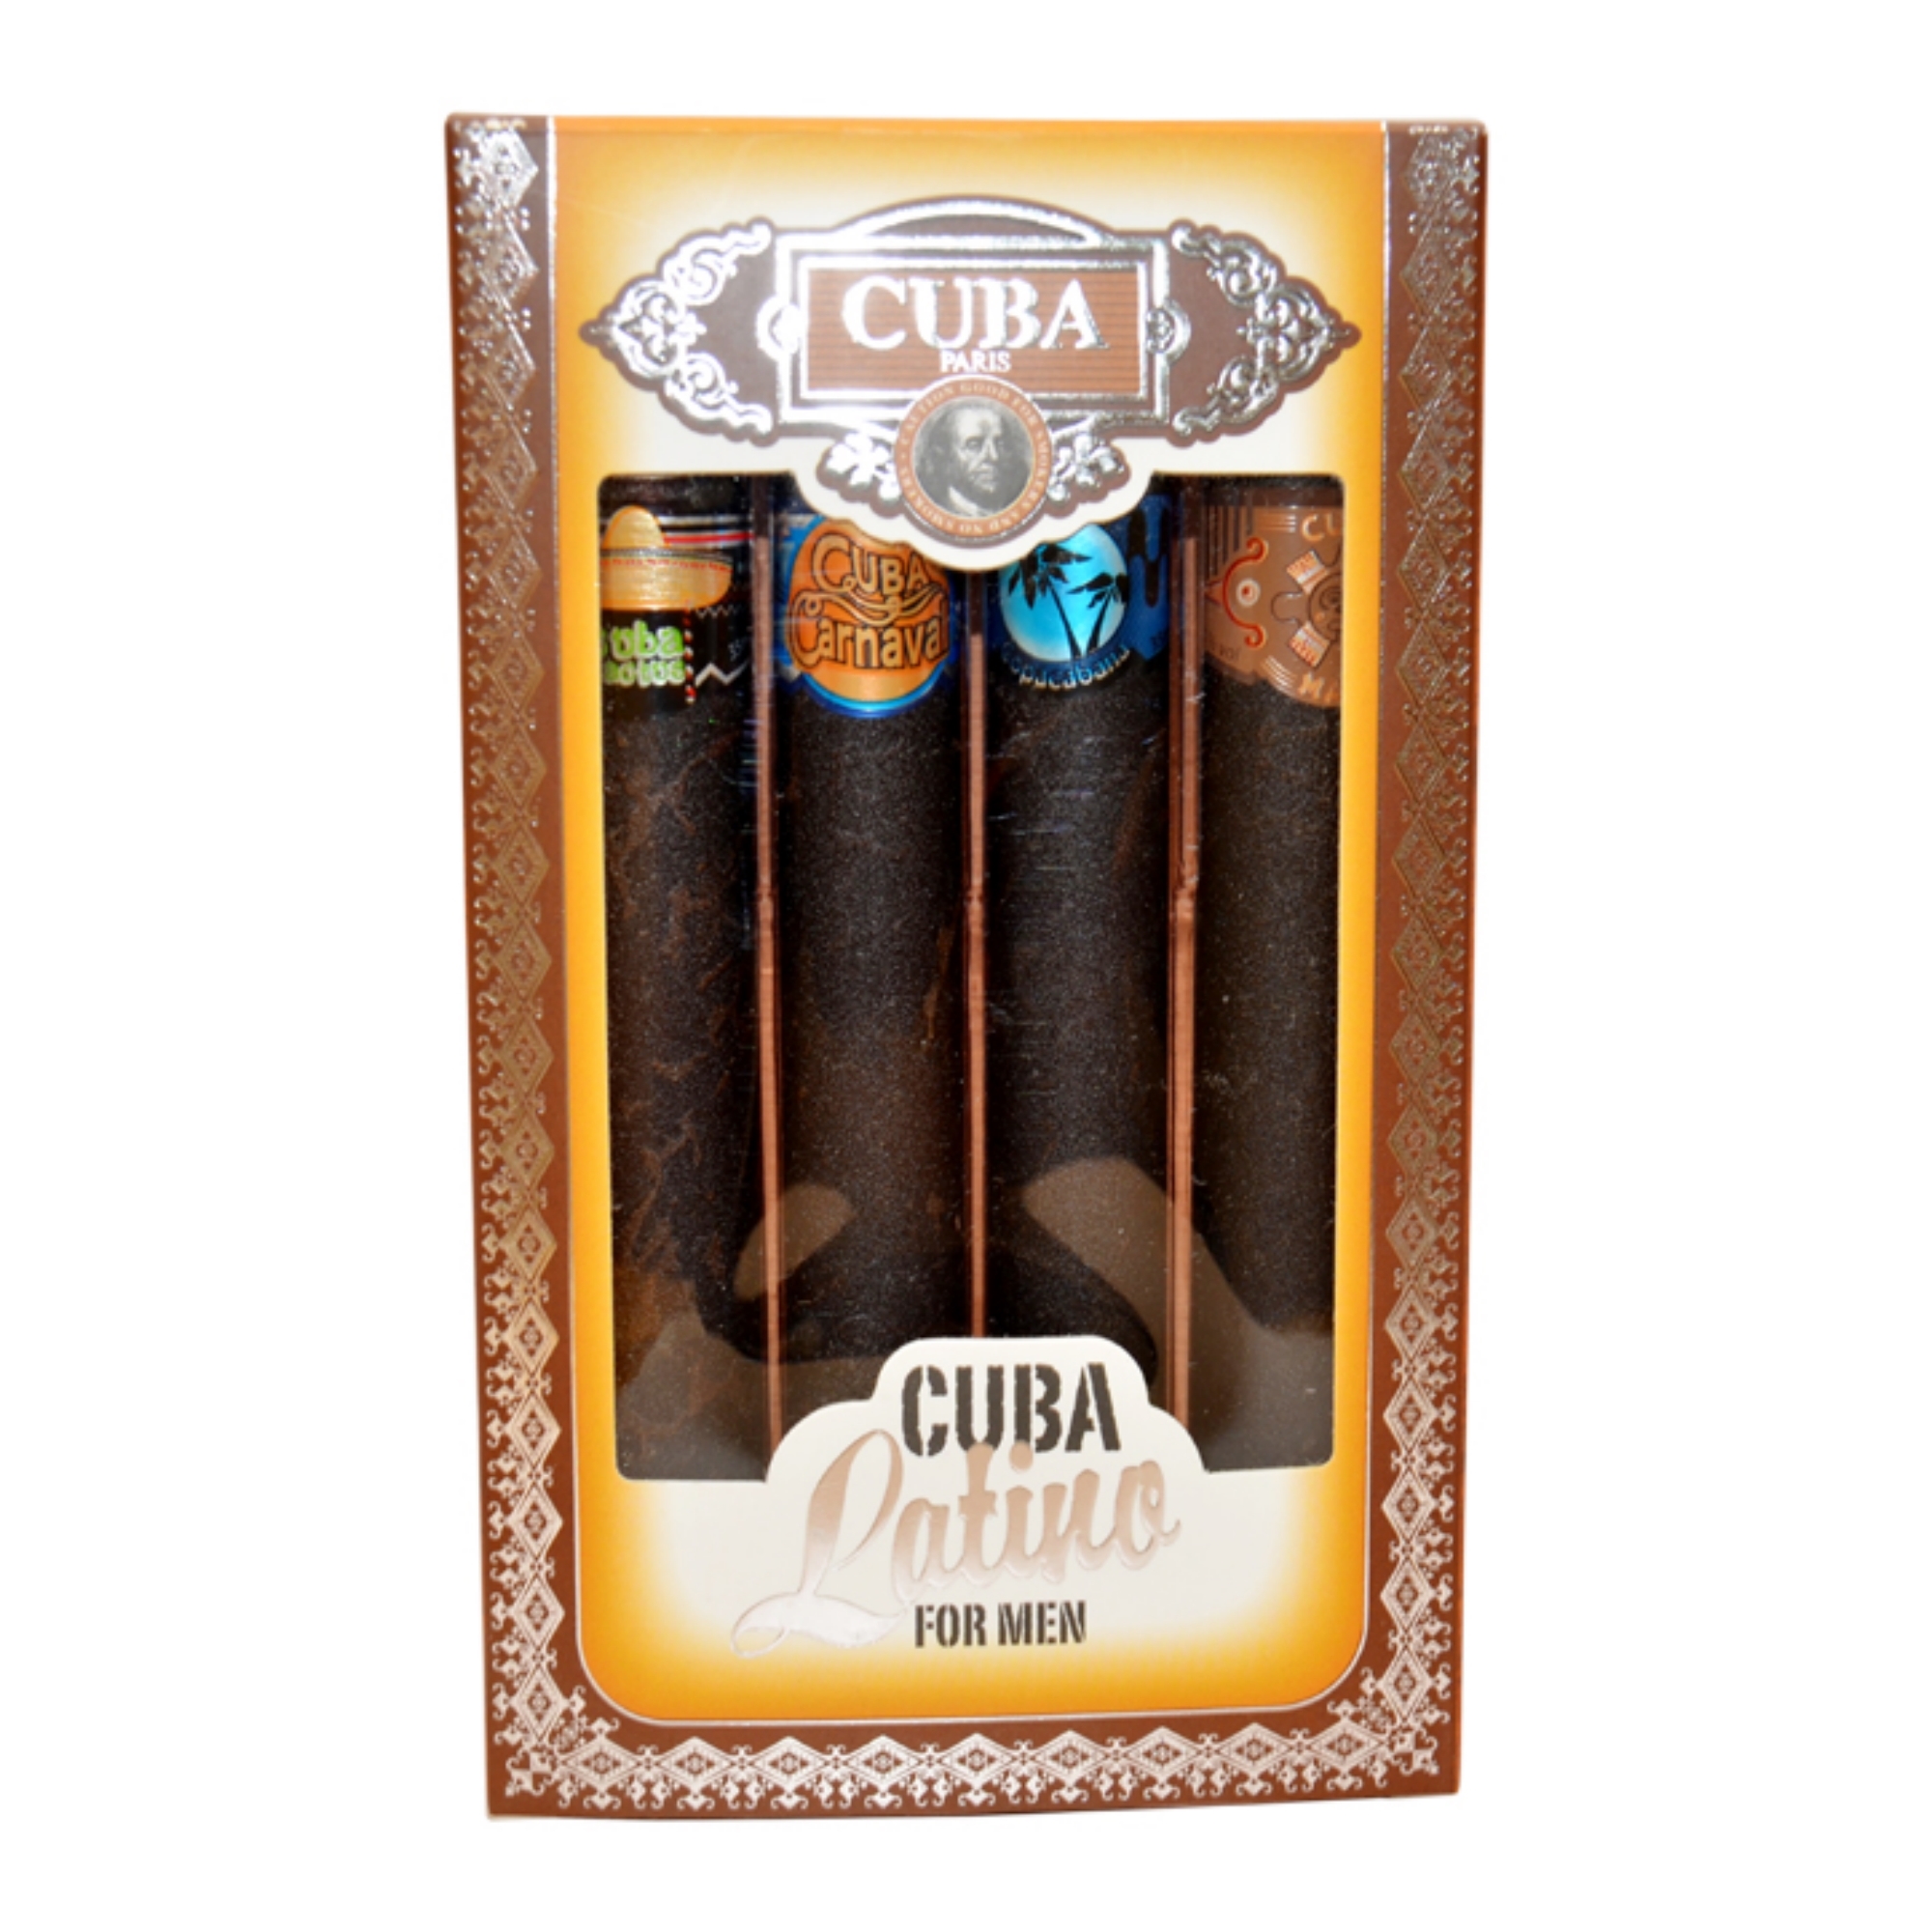 Cuba Latino Collection by Cuba for Men - 4 Pc Mini Gift Set